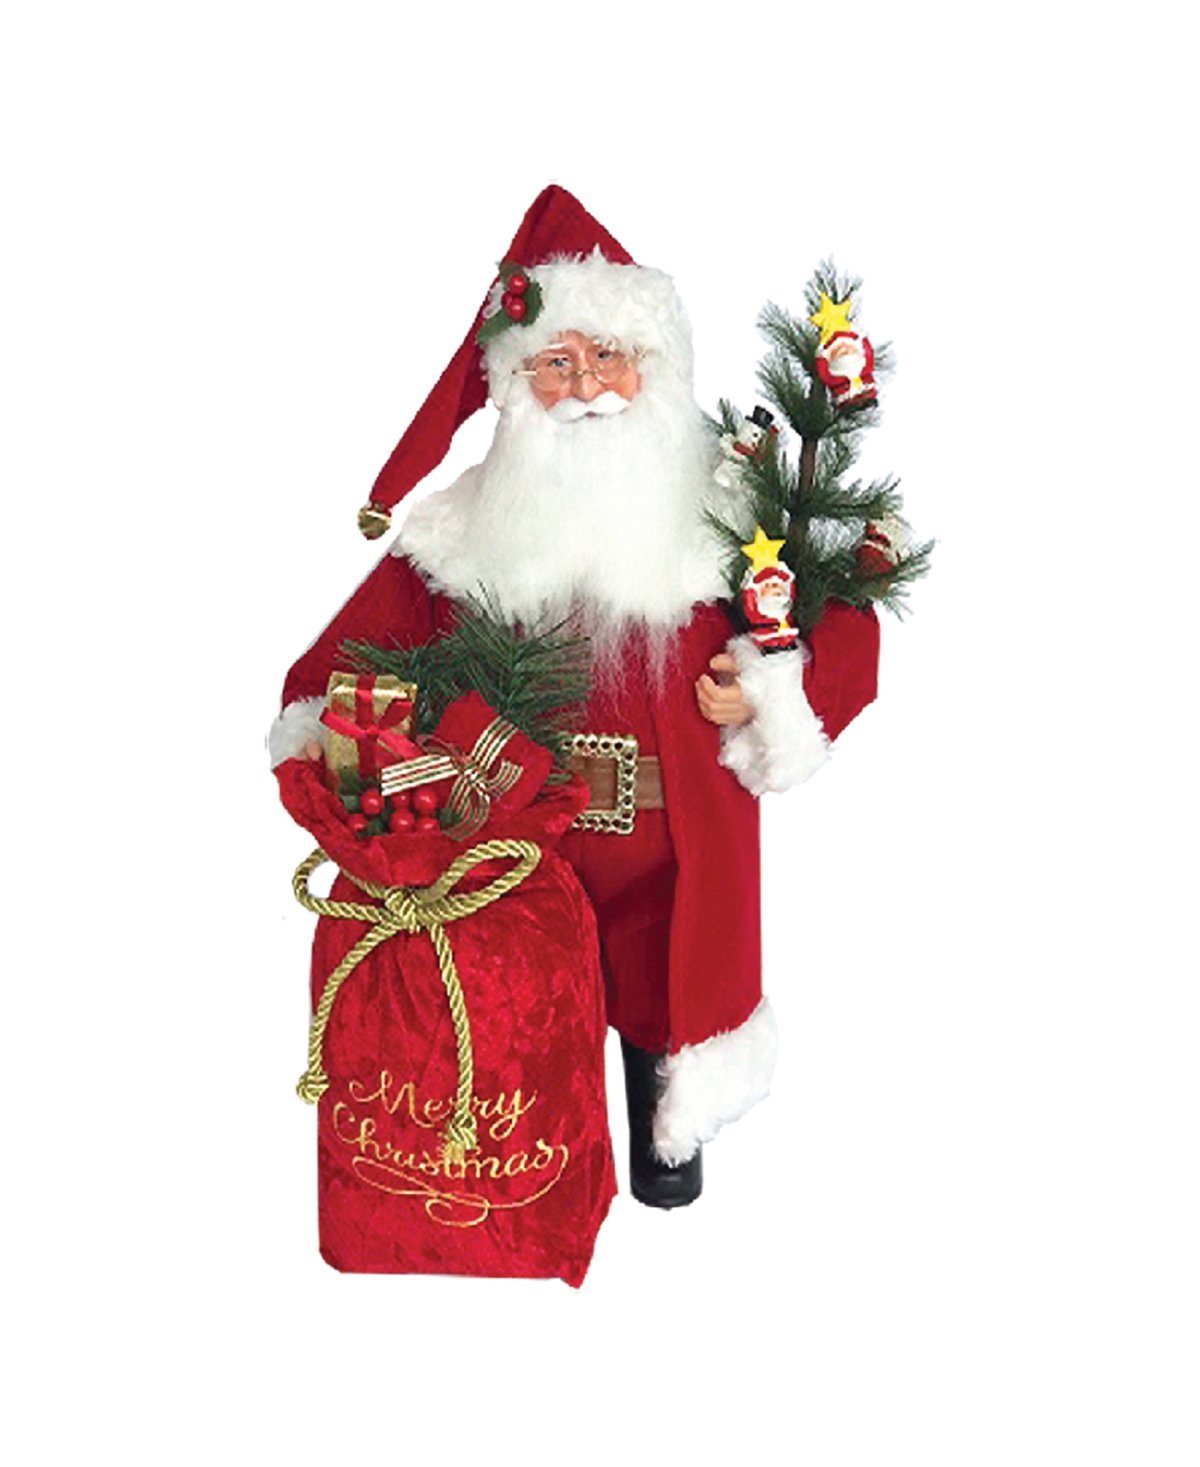 15" Santa Delivery - Red